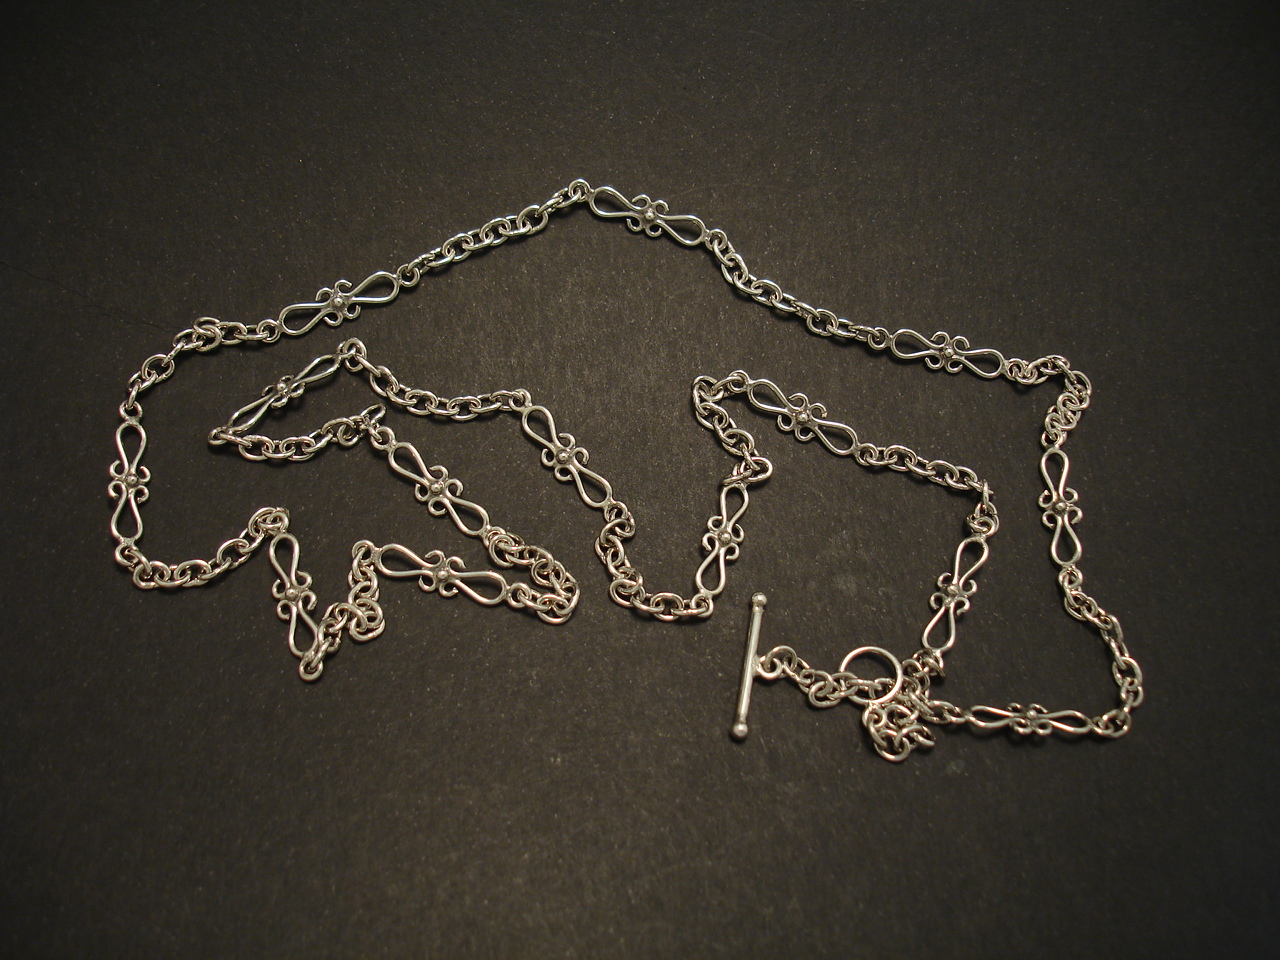 74cms Handmade Silver Chain, Arts and Crafts Design - Christopher ...